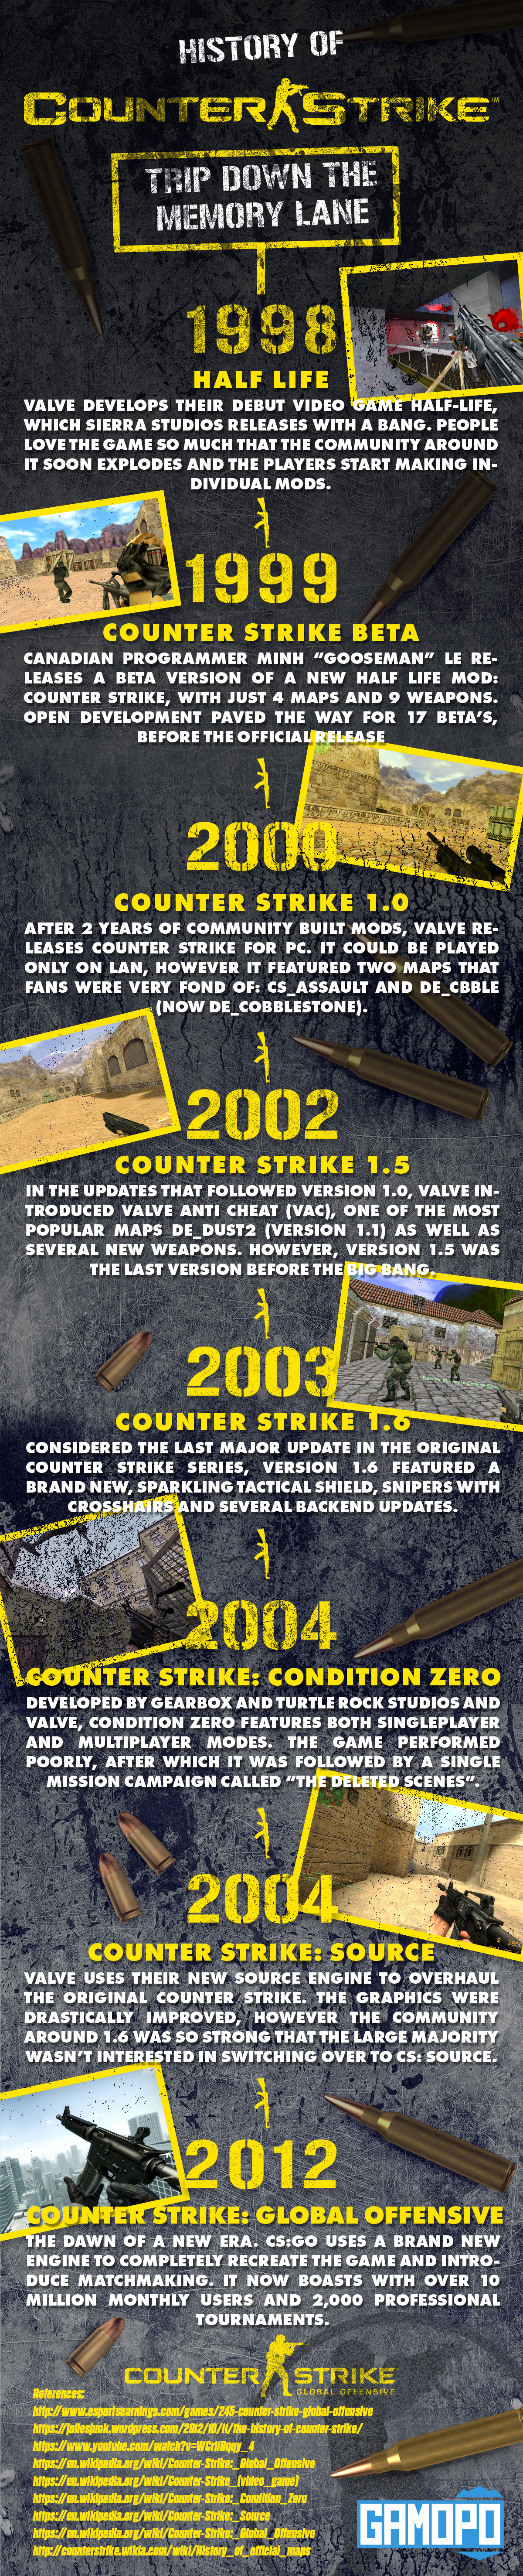 History of Counter Strike - Infographic